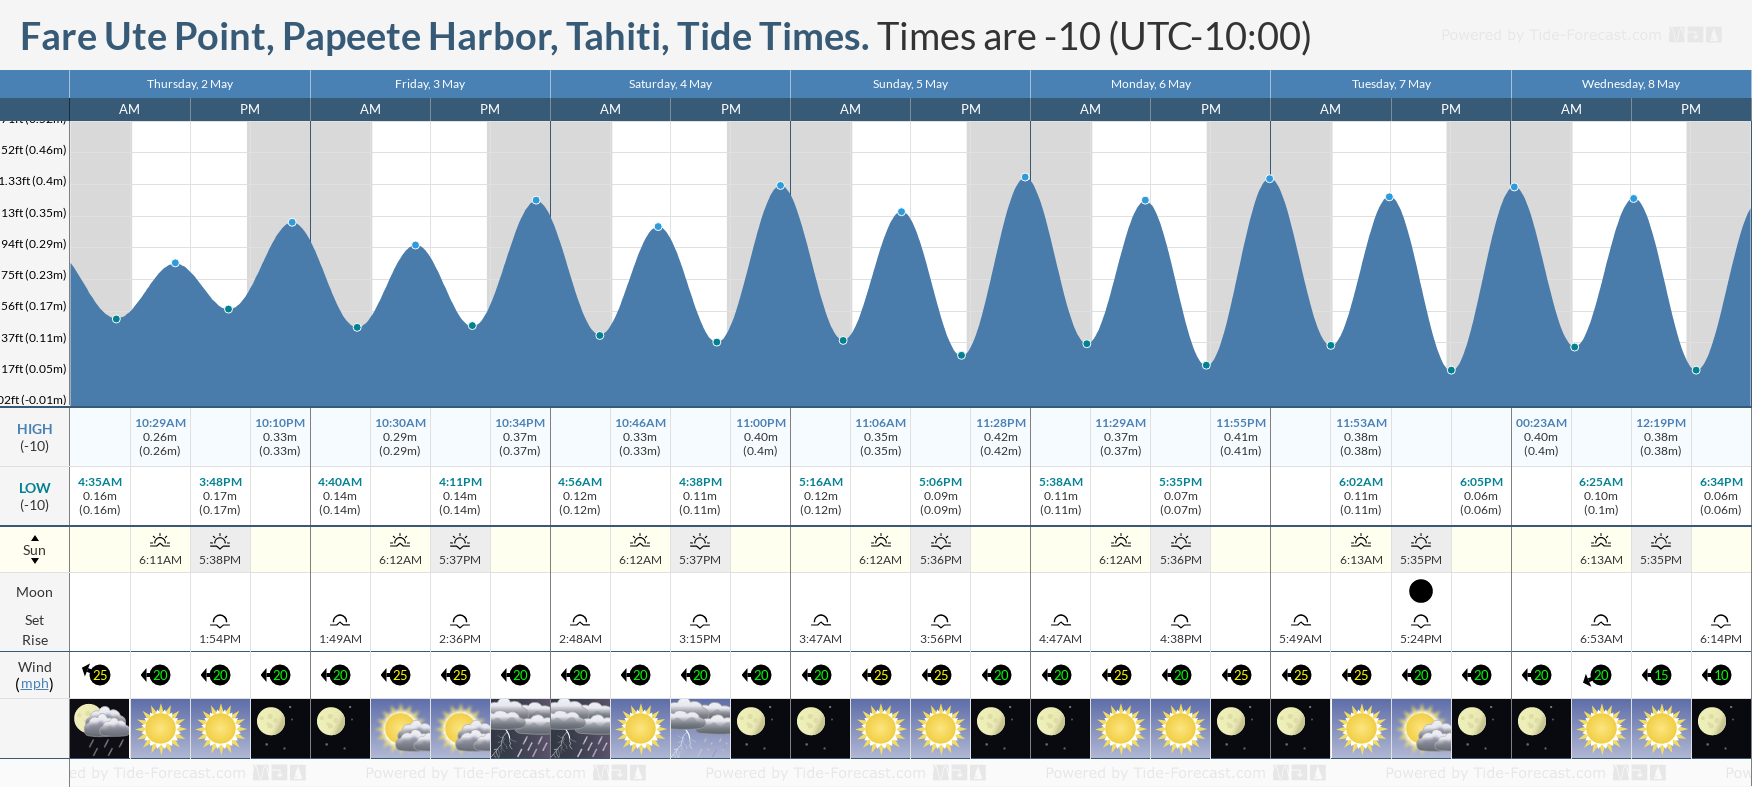 Fare Ute Point, Papeete Harbor, Tahiti Tide Chart including high and low tide tide times for the next 7 days